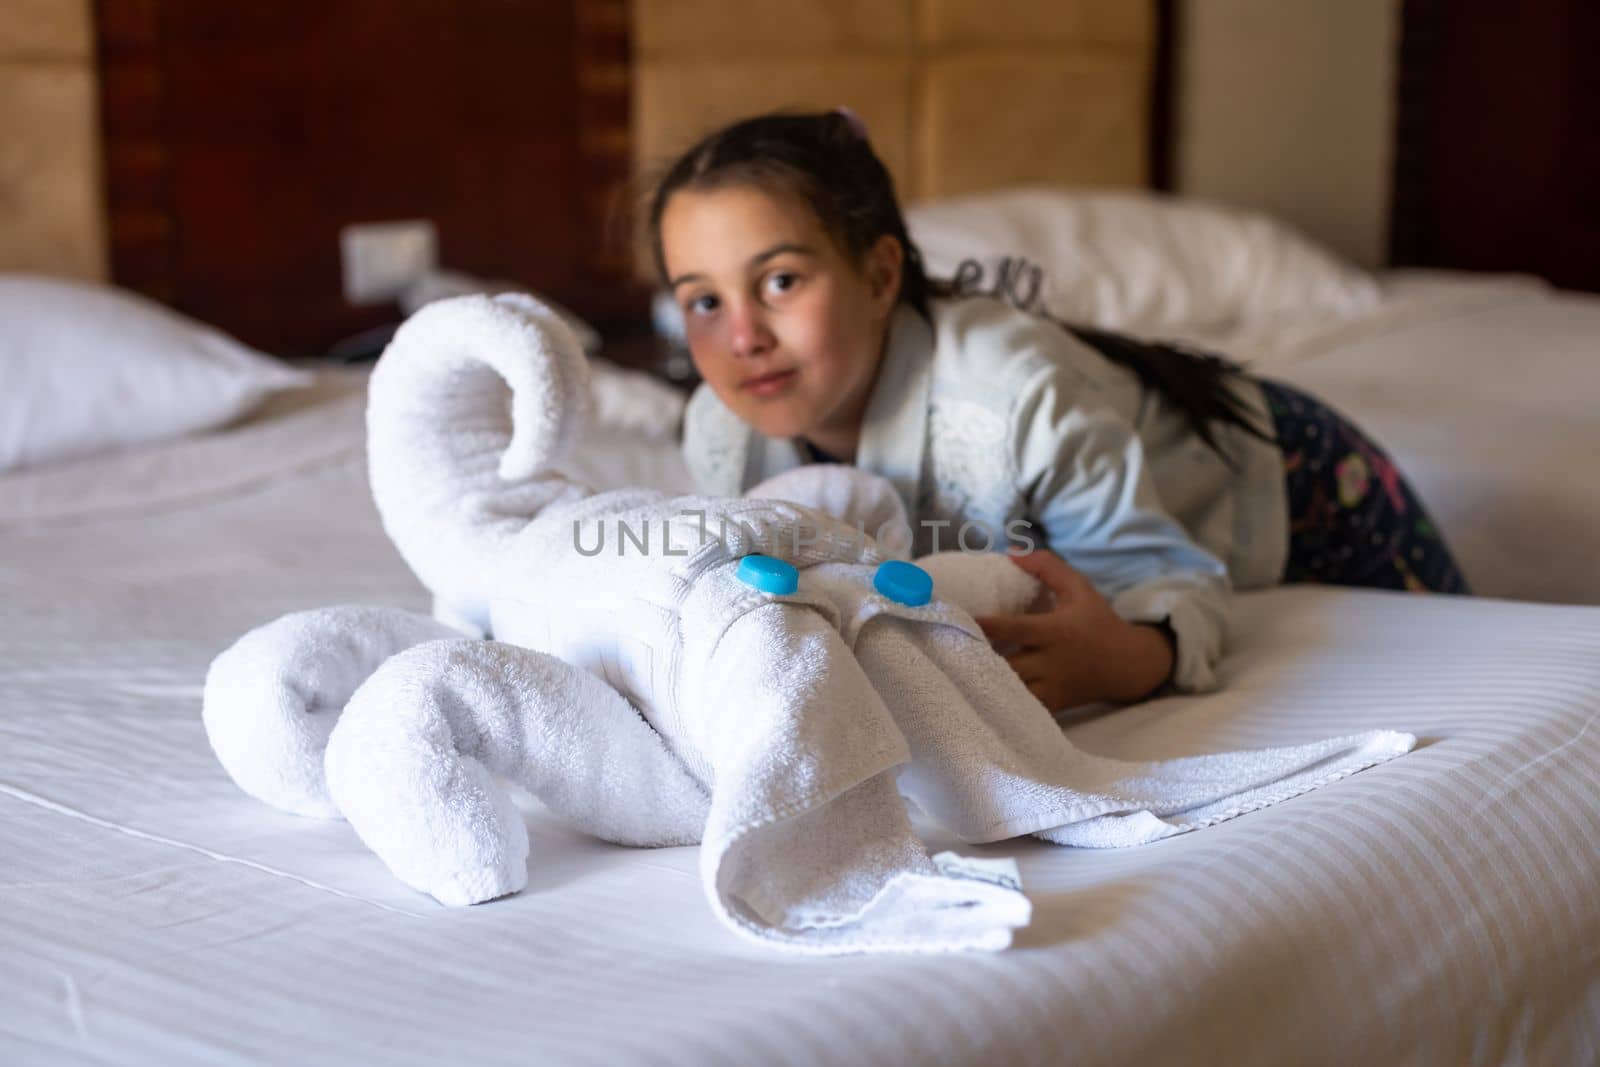 A squid made of towels on a bed in a hotel.